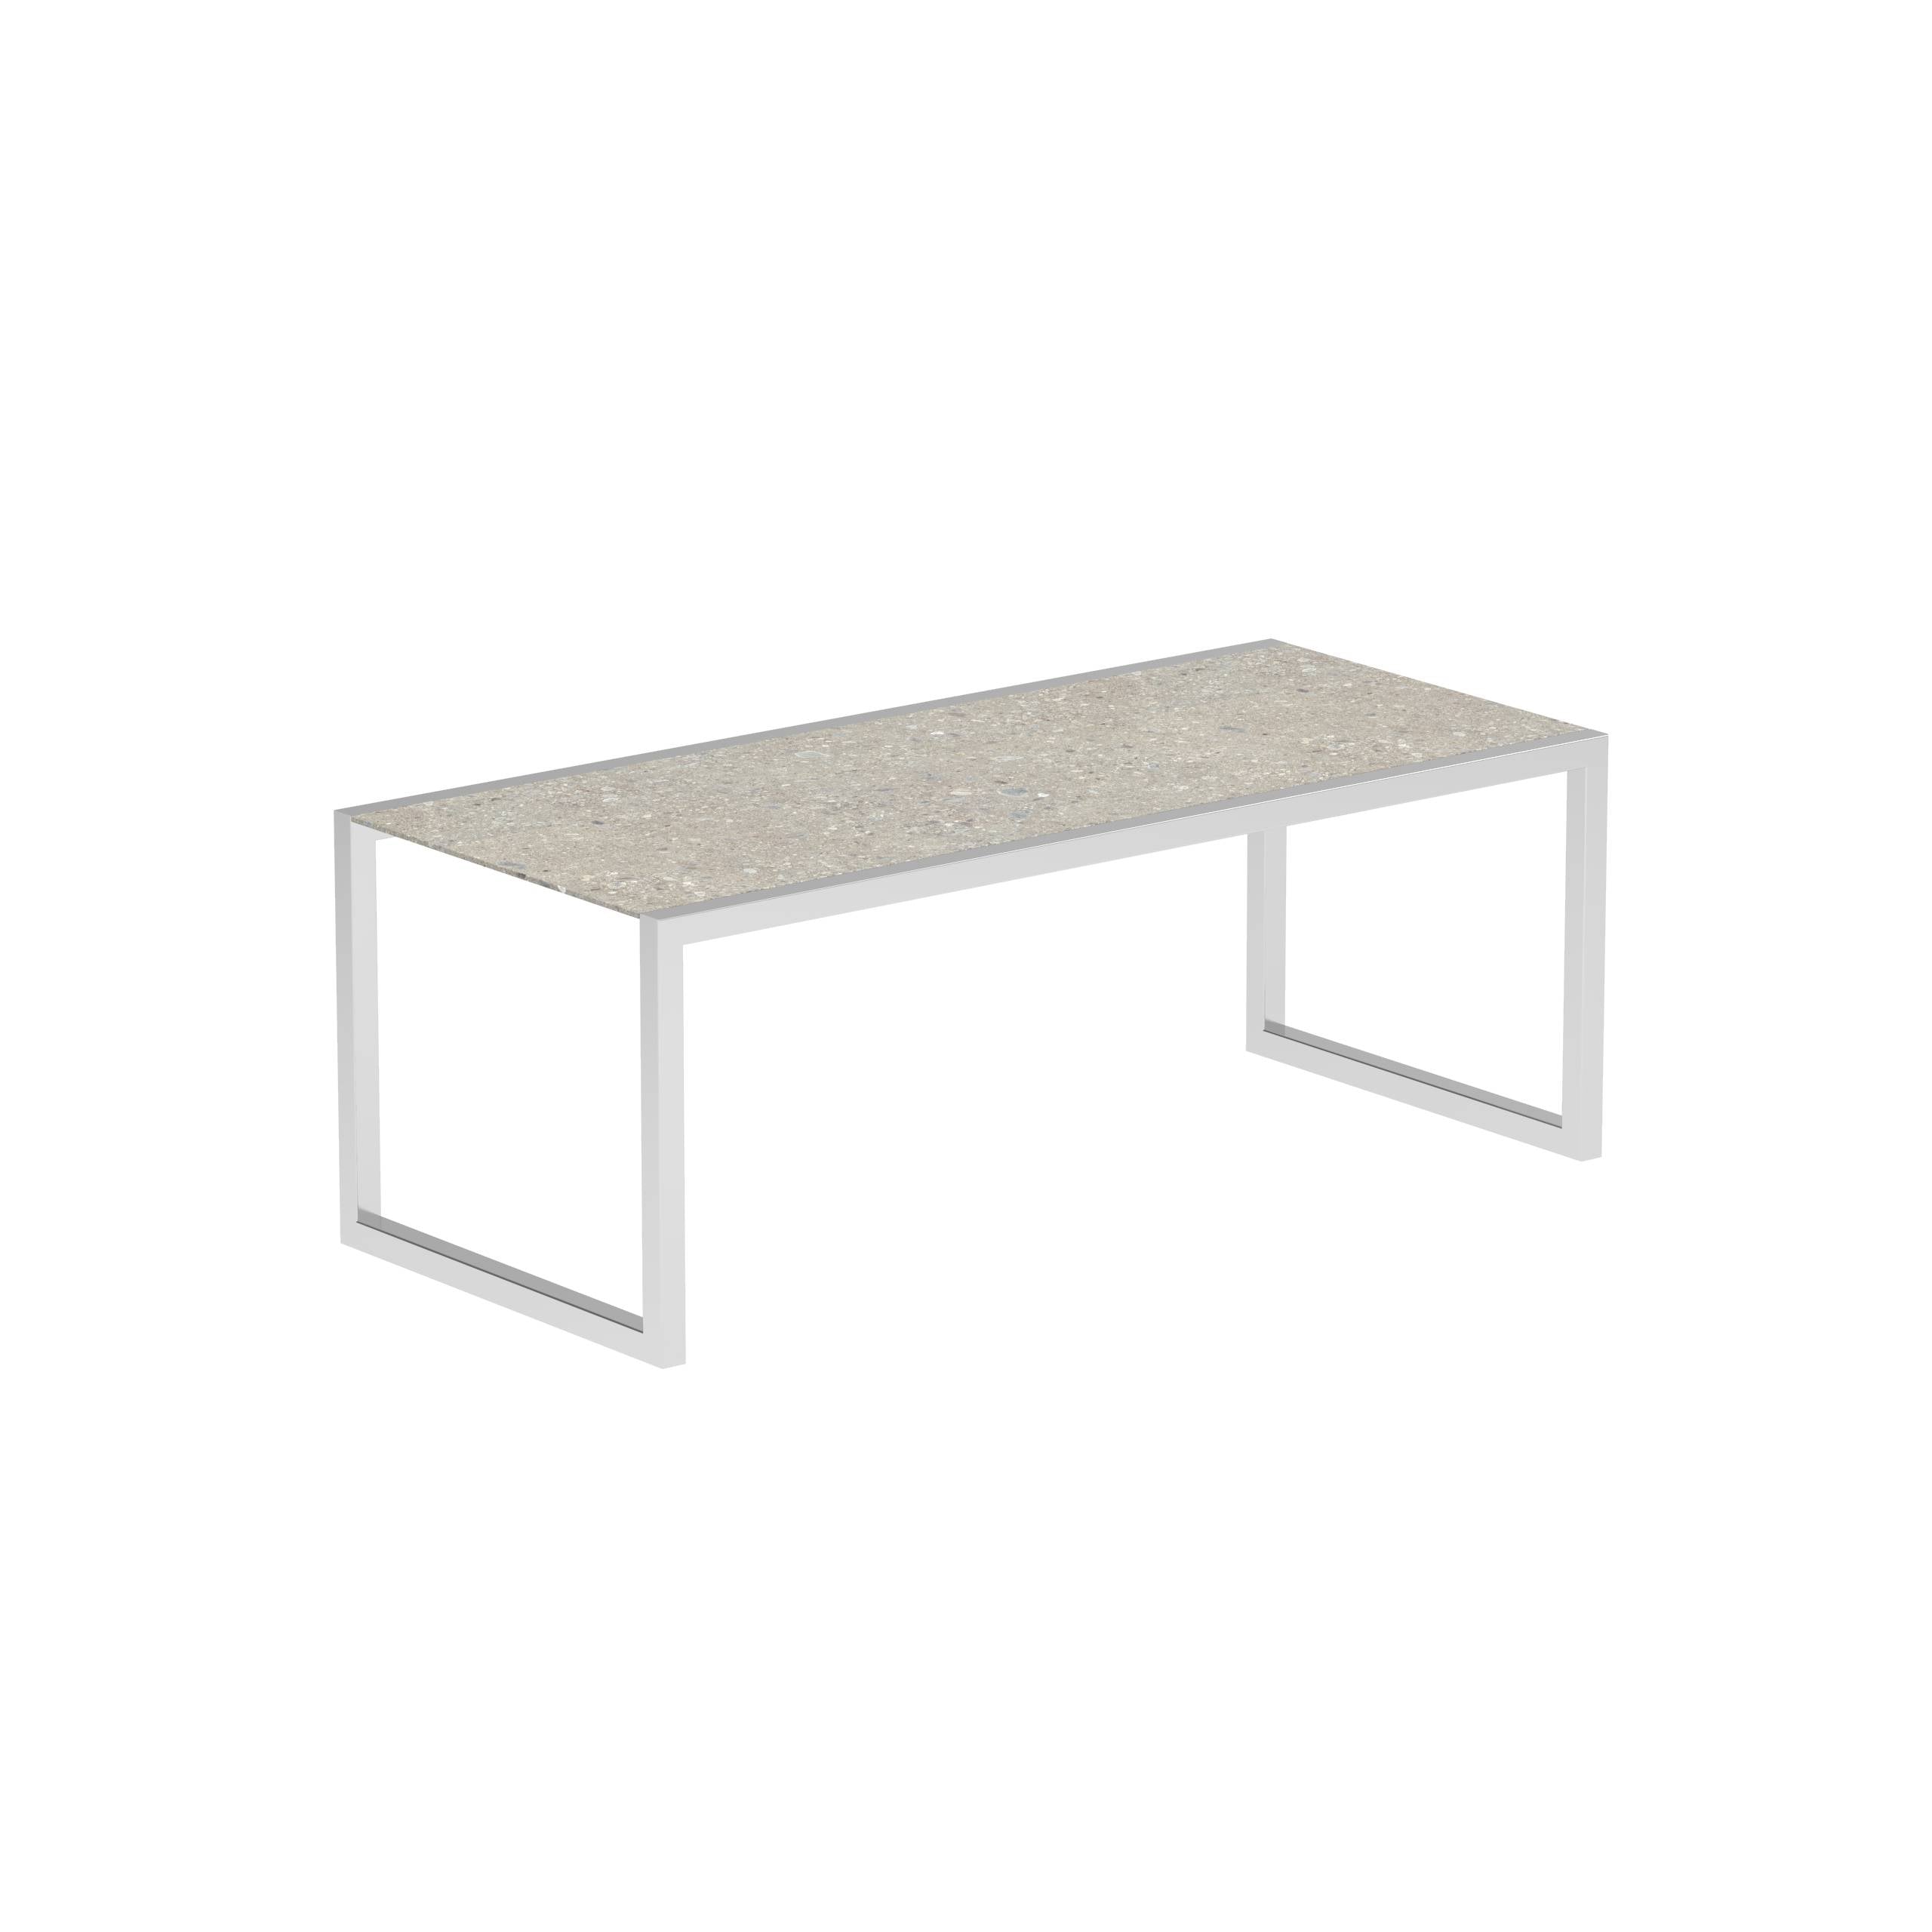 Ninix Table 200x90cm With Stainless Steel El.Pol. And Ceramic Ceppo Dolomitica